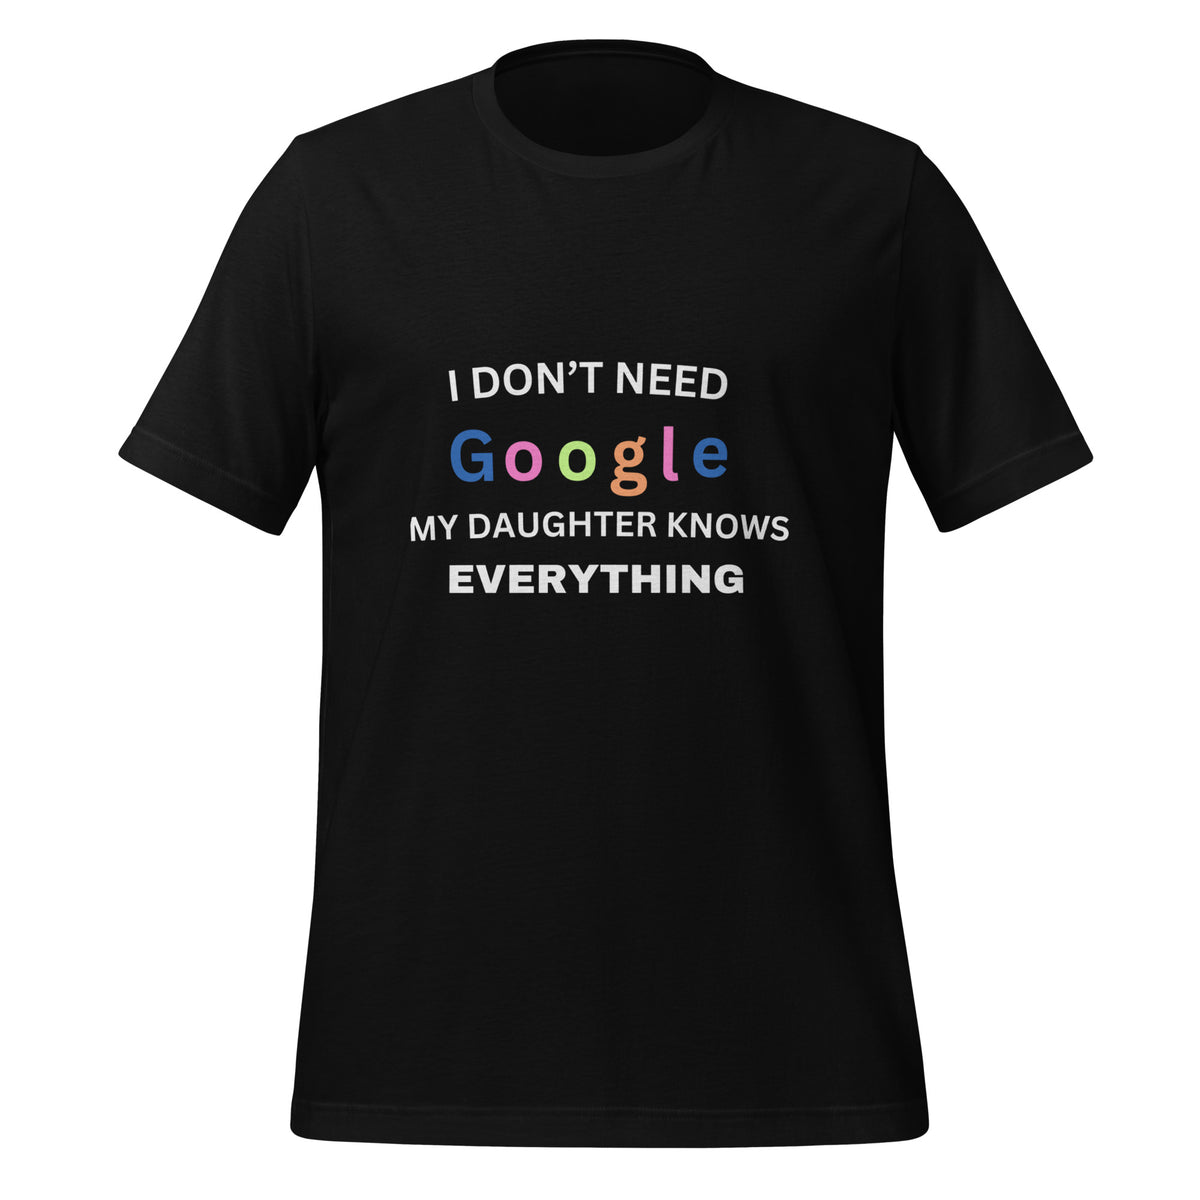 UNISEX T-SHIRT - I DON'T NEED GOOGLE MY DAUGHTER KNOWS EVERYTHING